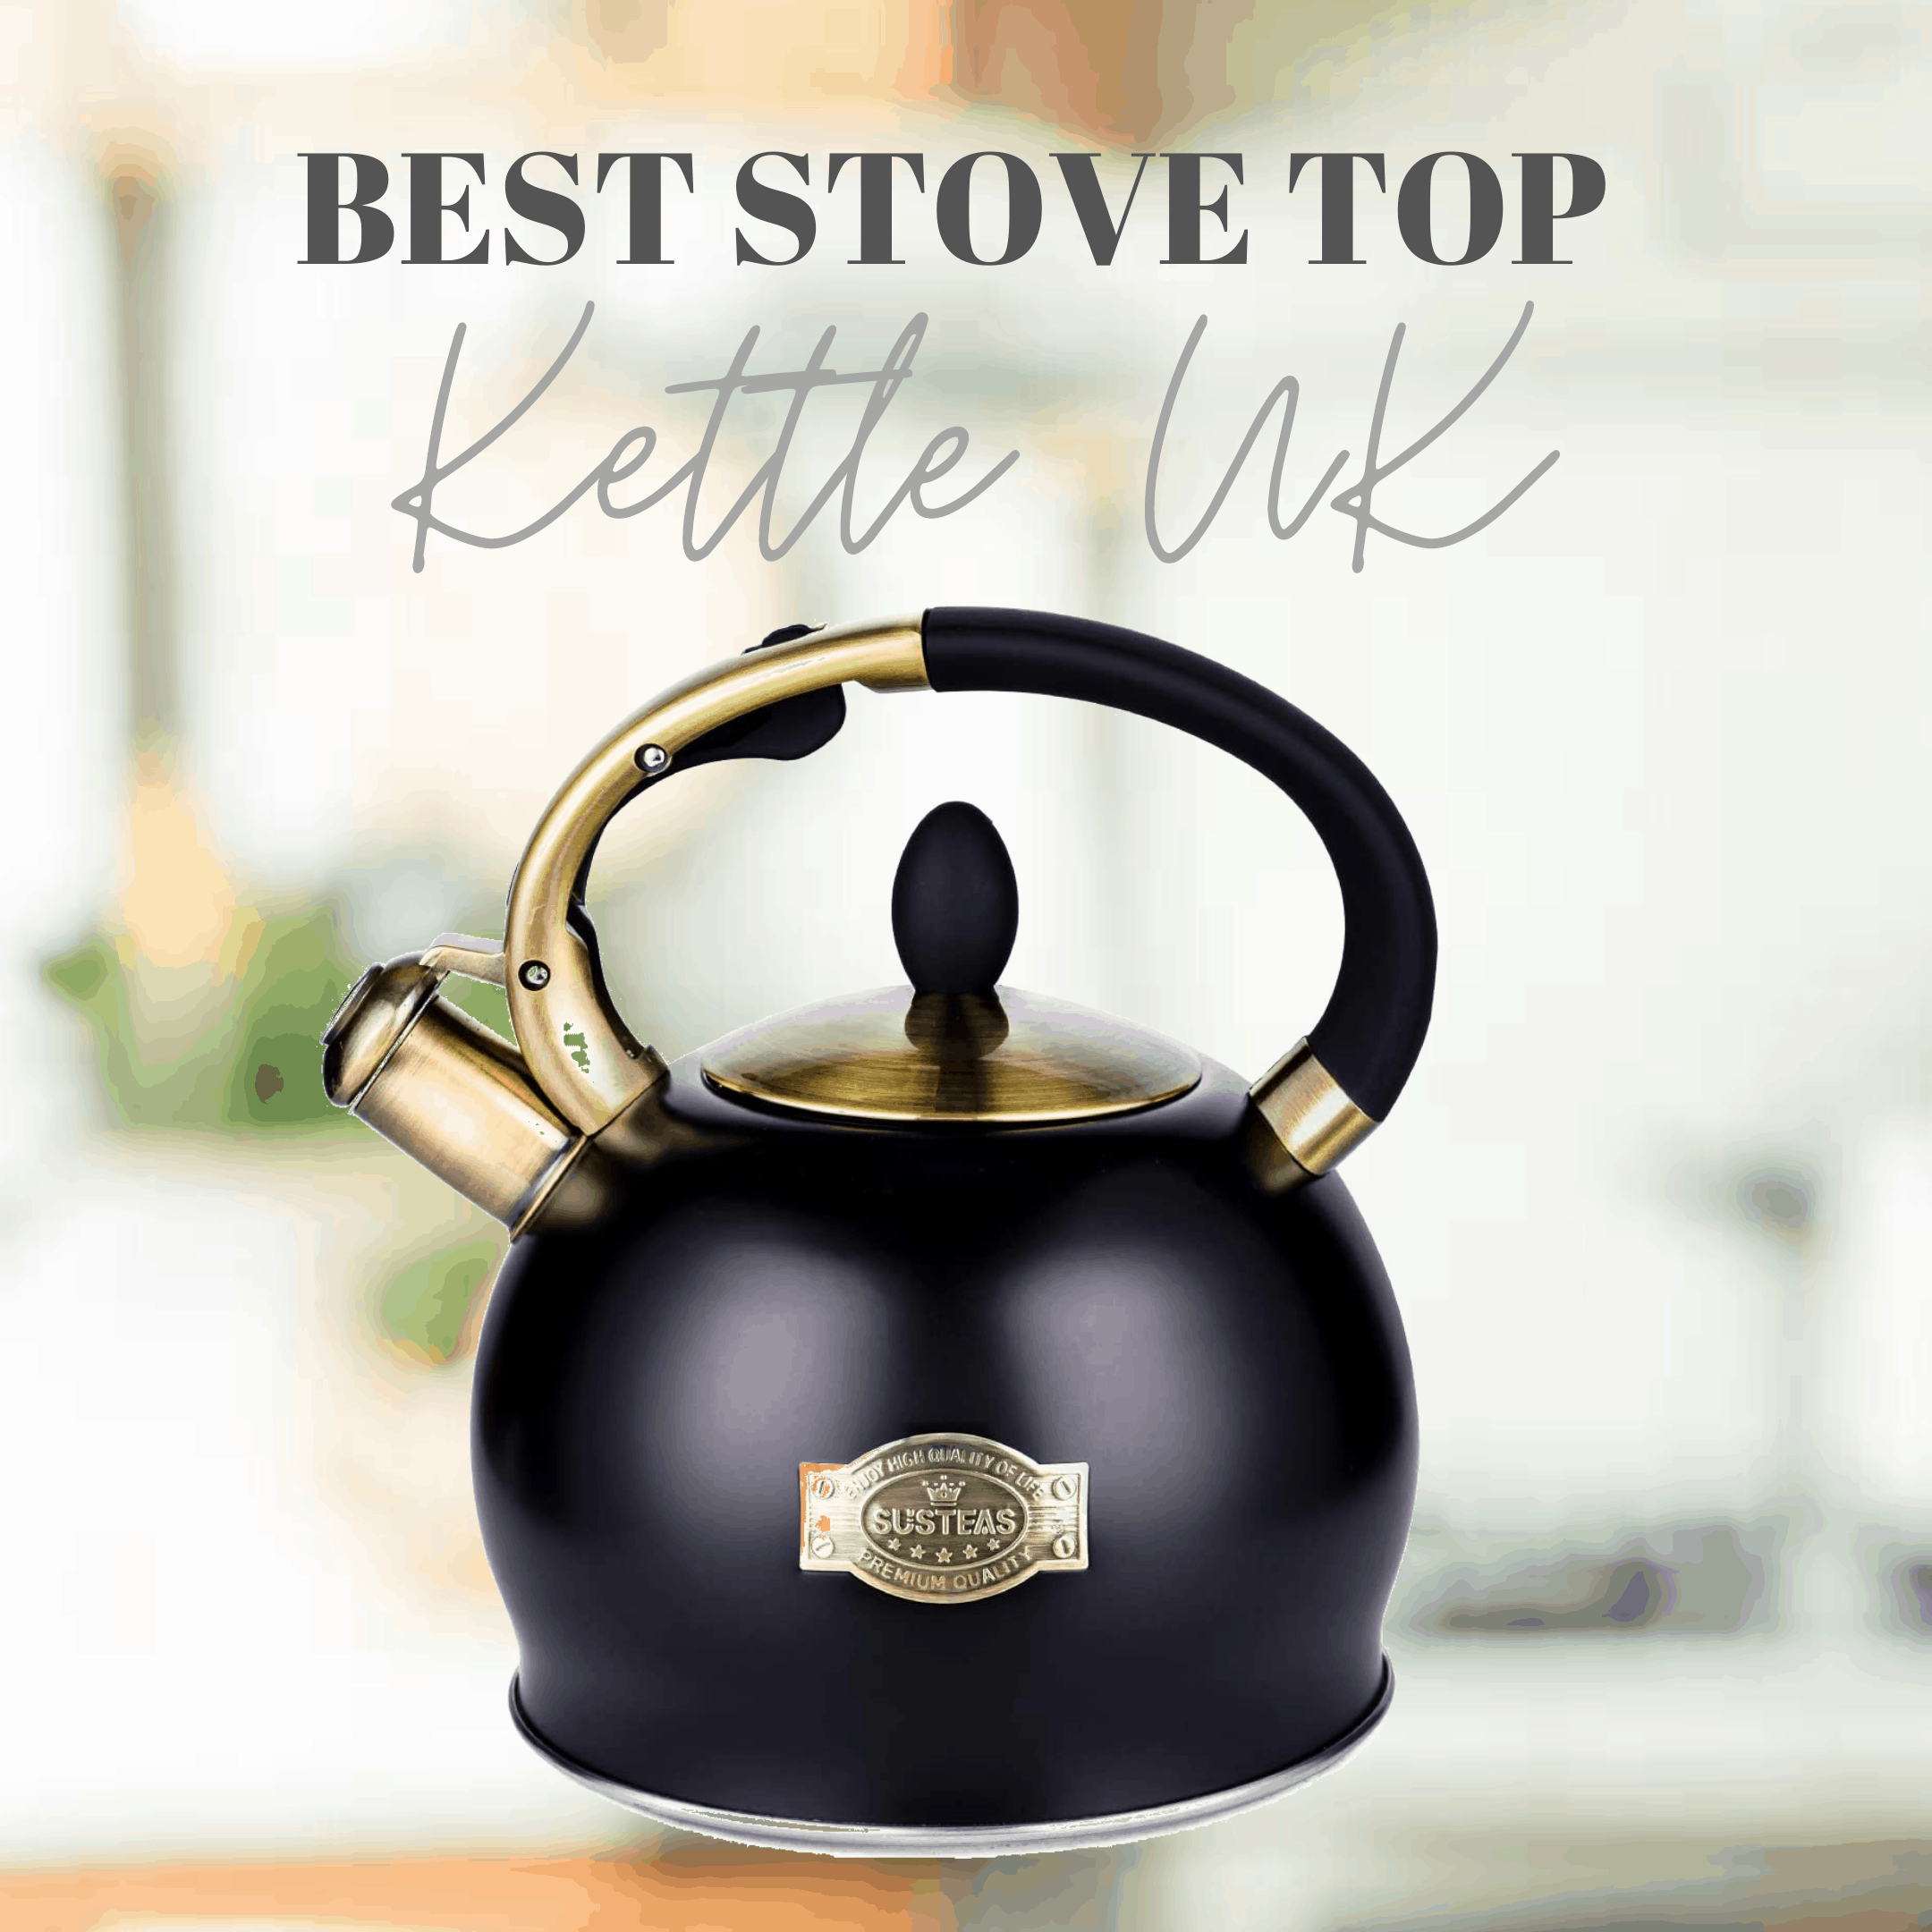 Whistling Tea Kettles Stovetop with Boils Faster Bottom,Surgical Brushed Stianless Steel Finish Whistling Teapot 3 Quart,1YR Warranty 1 Tea Maker Infuser Included by Kmatee 